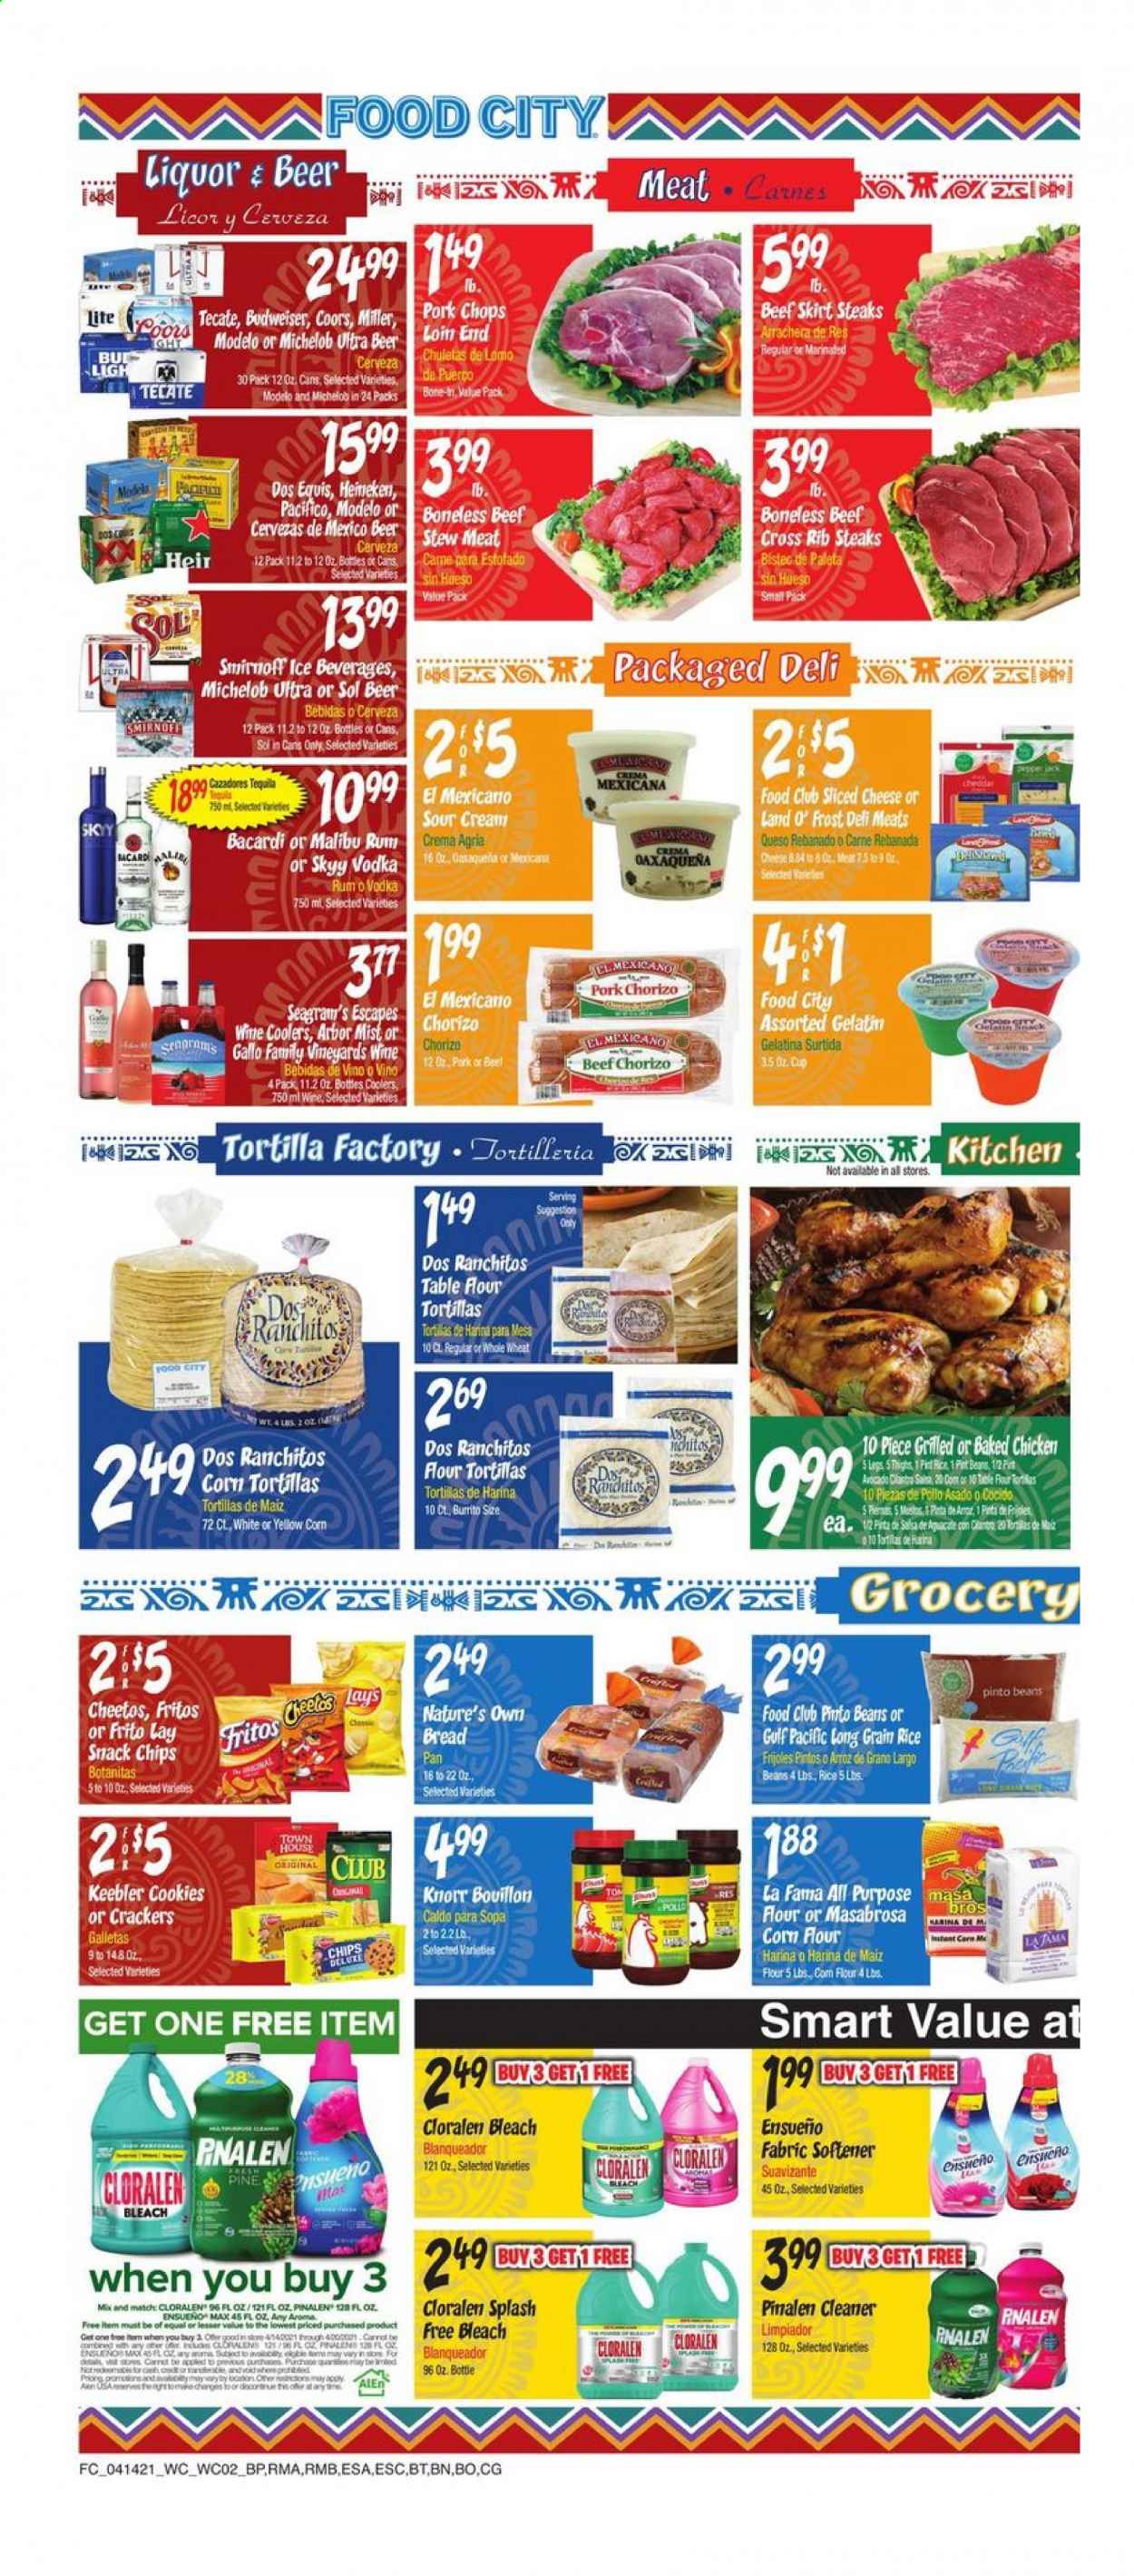 thumbnail - Food City Flyer - 04/14/2021 - 04/20/2021 - Sales products - Budweiser, Coors, Dos Equis, Michelob, stew meat, bread, corn tortillas, tortillas, flour tortillas, beans, Knorr, burrito, chorizo, sliced cheese, sour cream, cookies, snack, crackers, Keebler, Fritos, Cheetos, chips, bouillon, rice, pinto beans, long grain rice, wine, Gallo Family, Bacardi, rum, Smirnoff, tequila, vodka, liquor, SKYY, Malibu, beer, Miller, Sol, Modelo, steak, pork chops, pork meat, Nature's Own. Page 2.